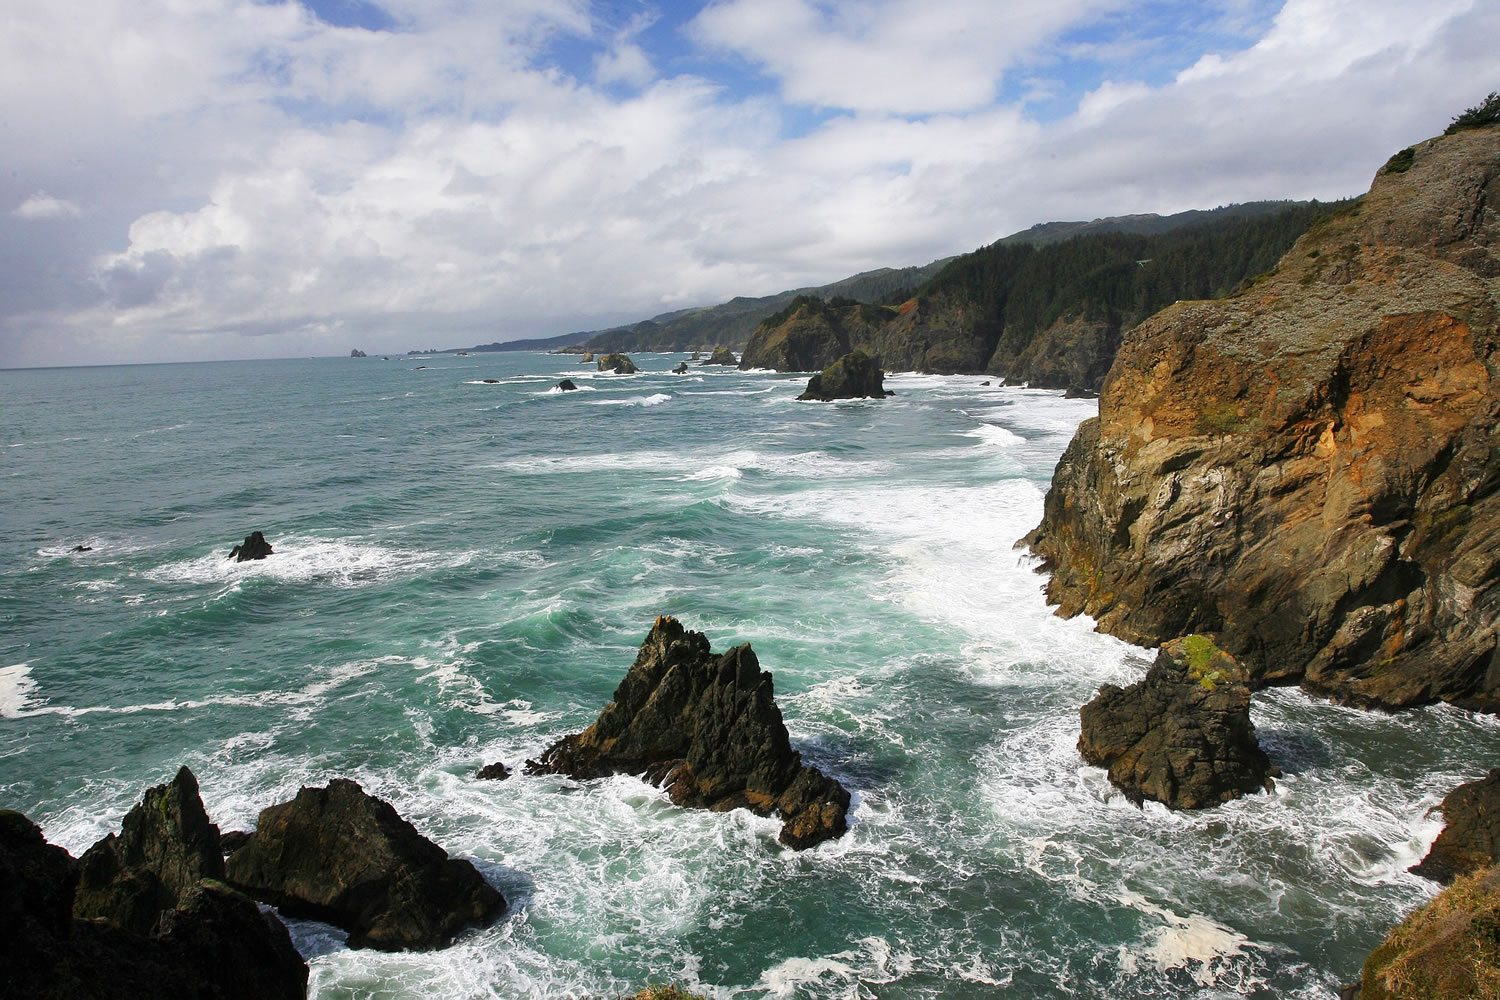 One of the most dramatic views on Oregon's South Coast is at the Samuel H.